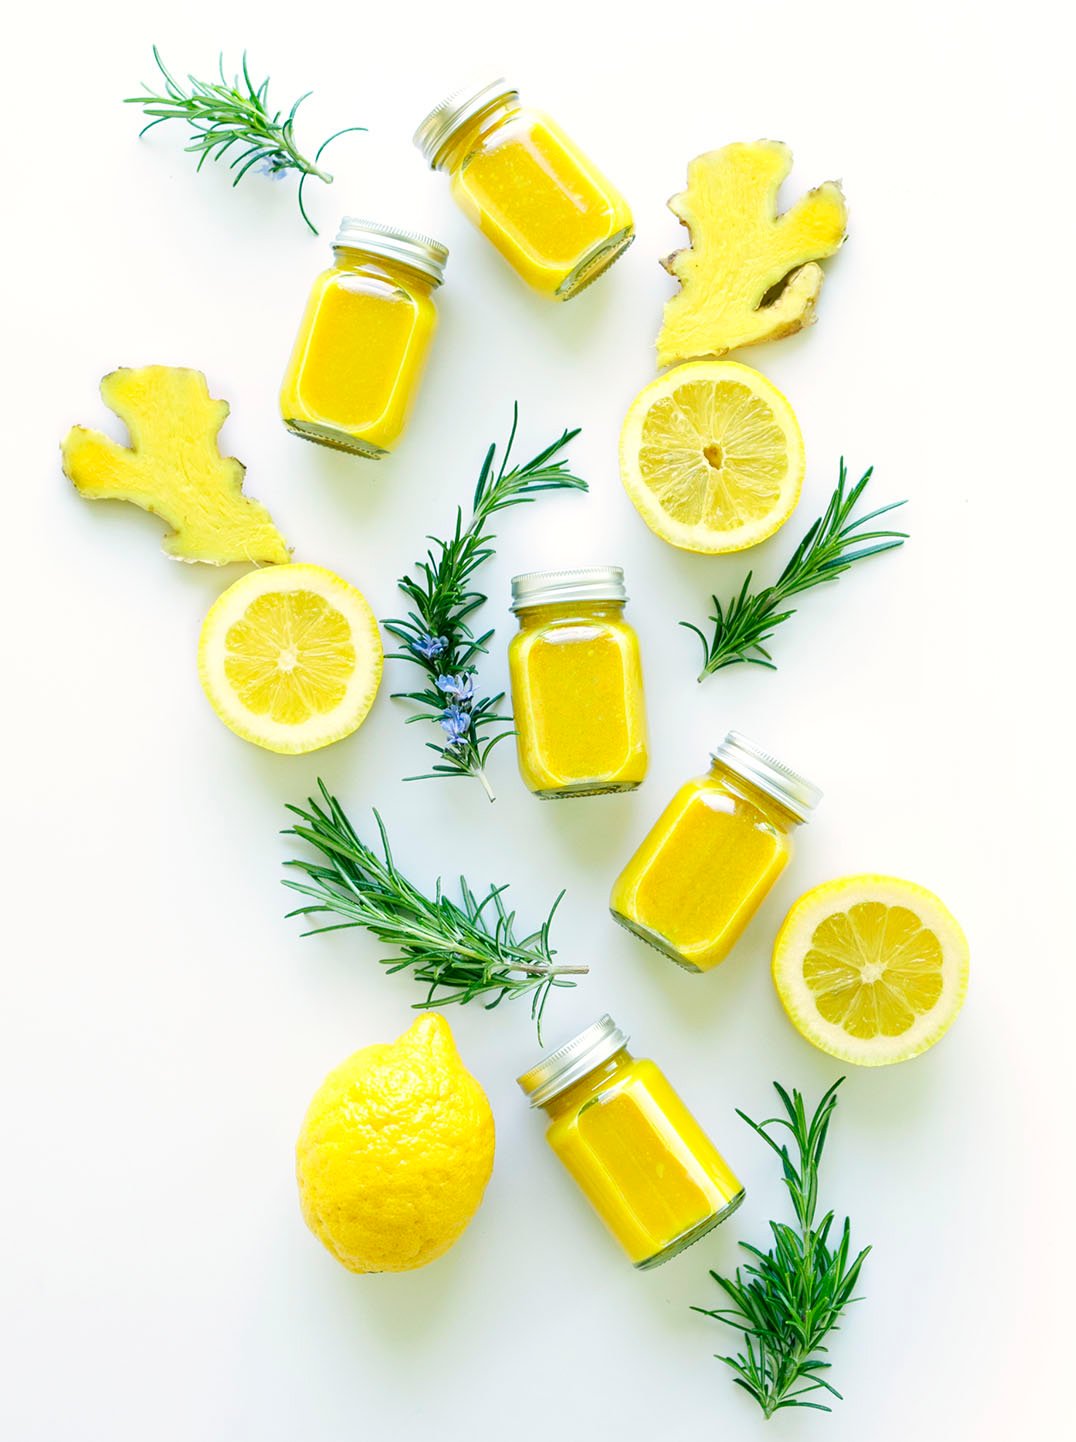 Overhead view of 5 small bottles filled with yellow juice surrounded by sprigs of rosemary lemon and ginger slices.